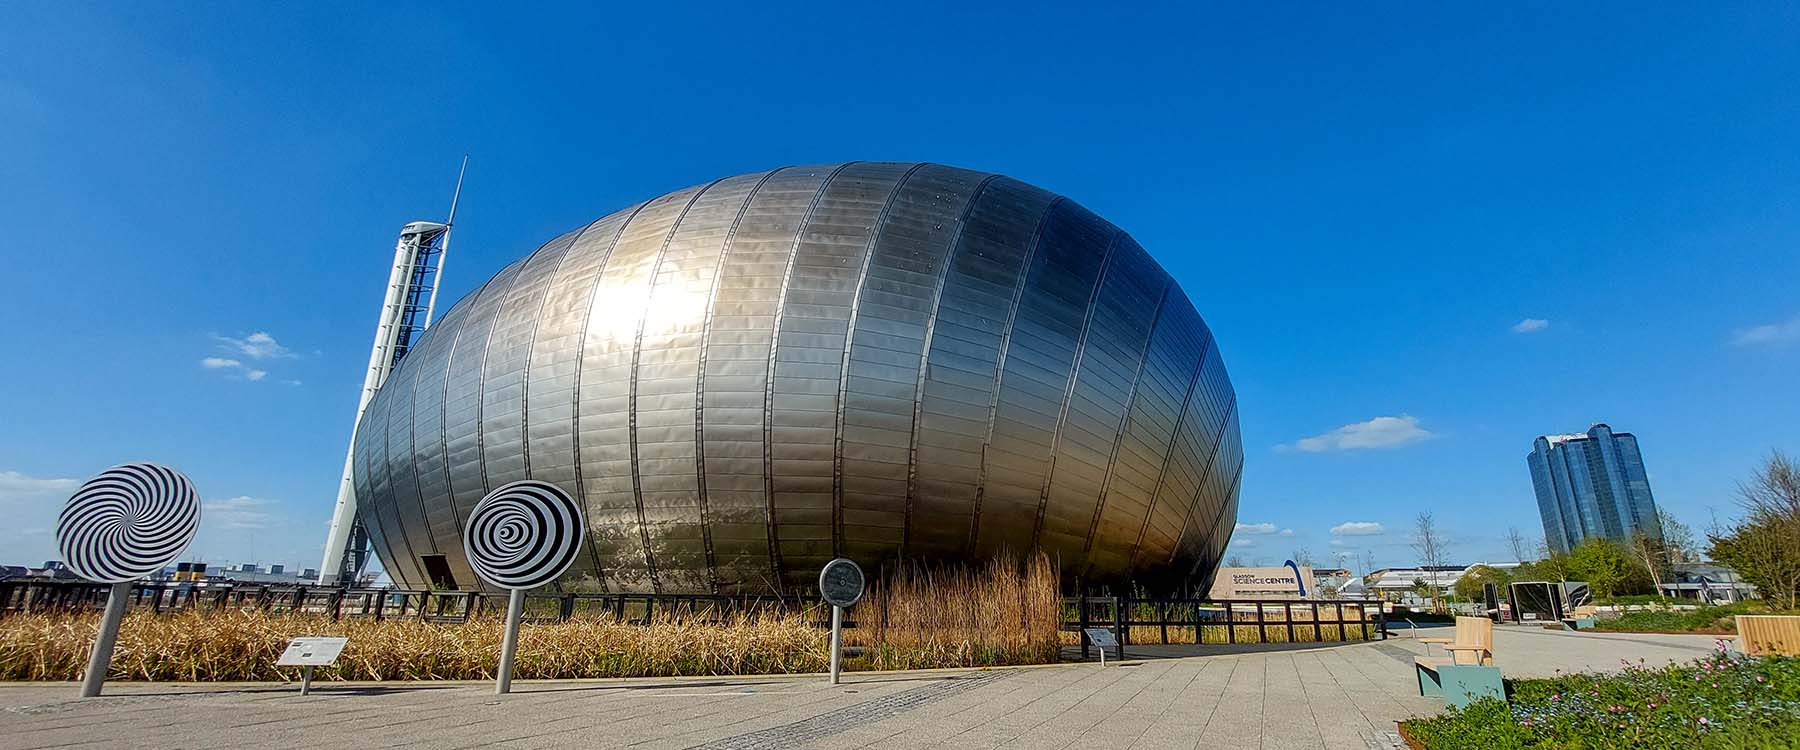 The exterior titanium shell of the IMAX building at Glasgow Science Centre